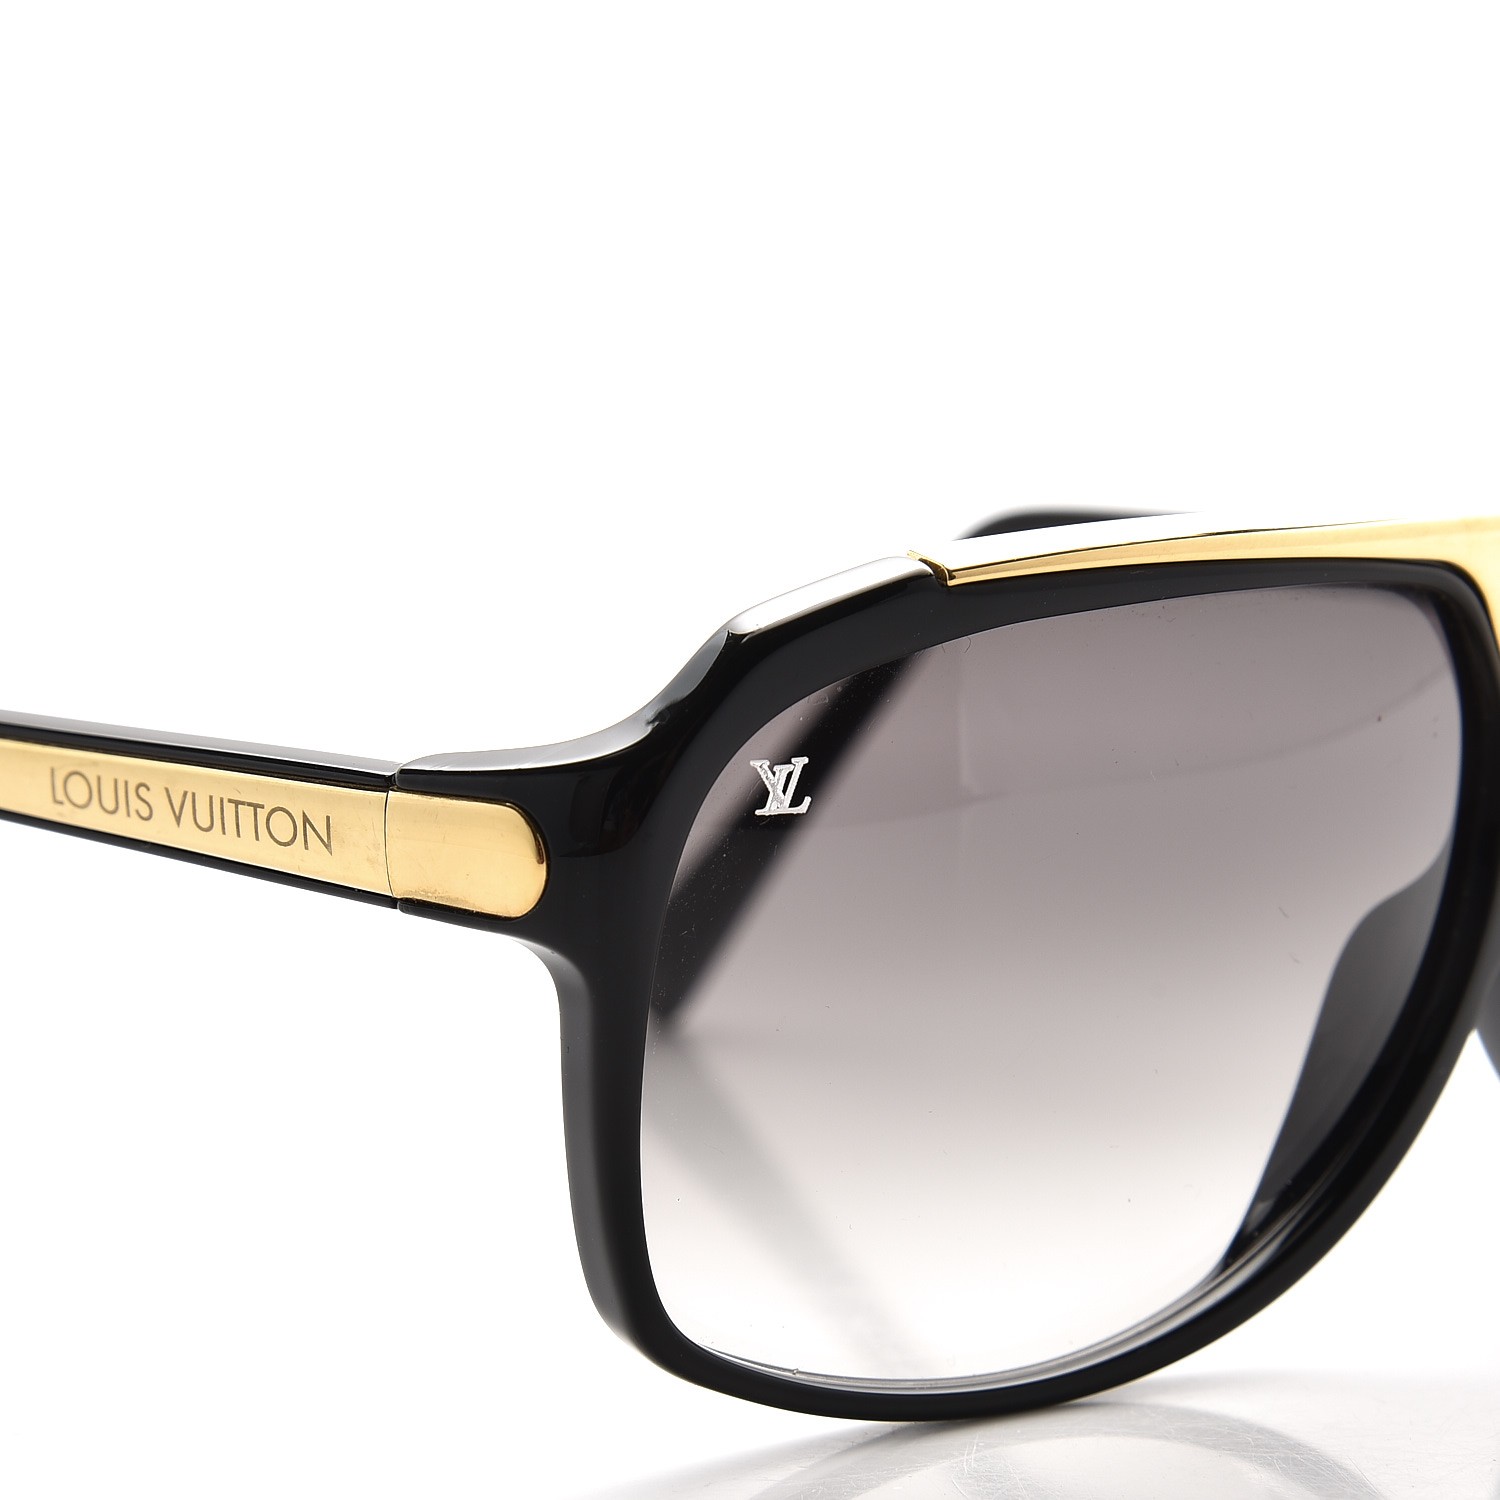 Louis Vuitton Sunglasses How To Tell If Real | Wydział Cybernetyki